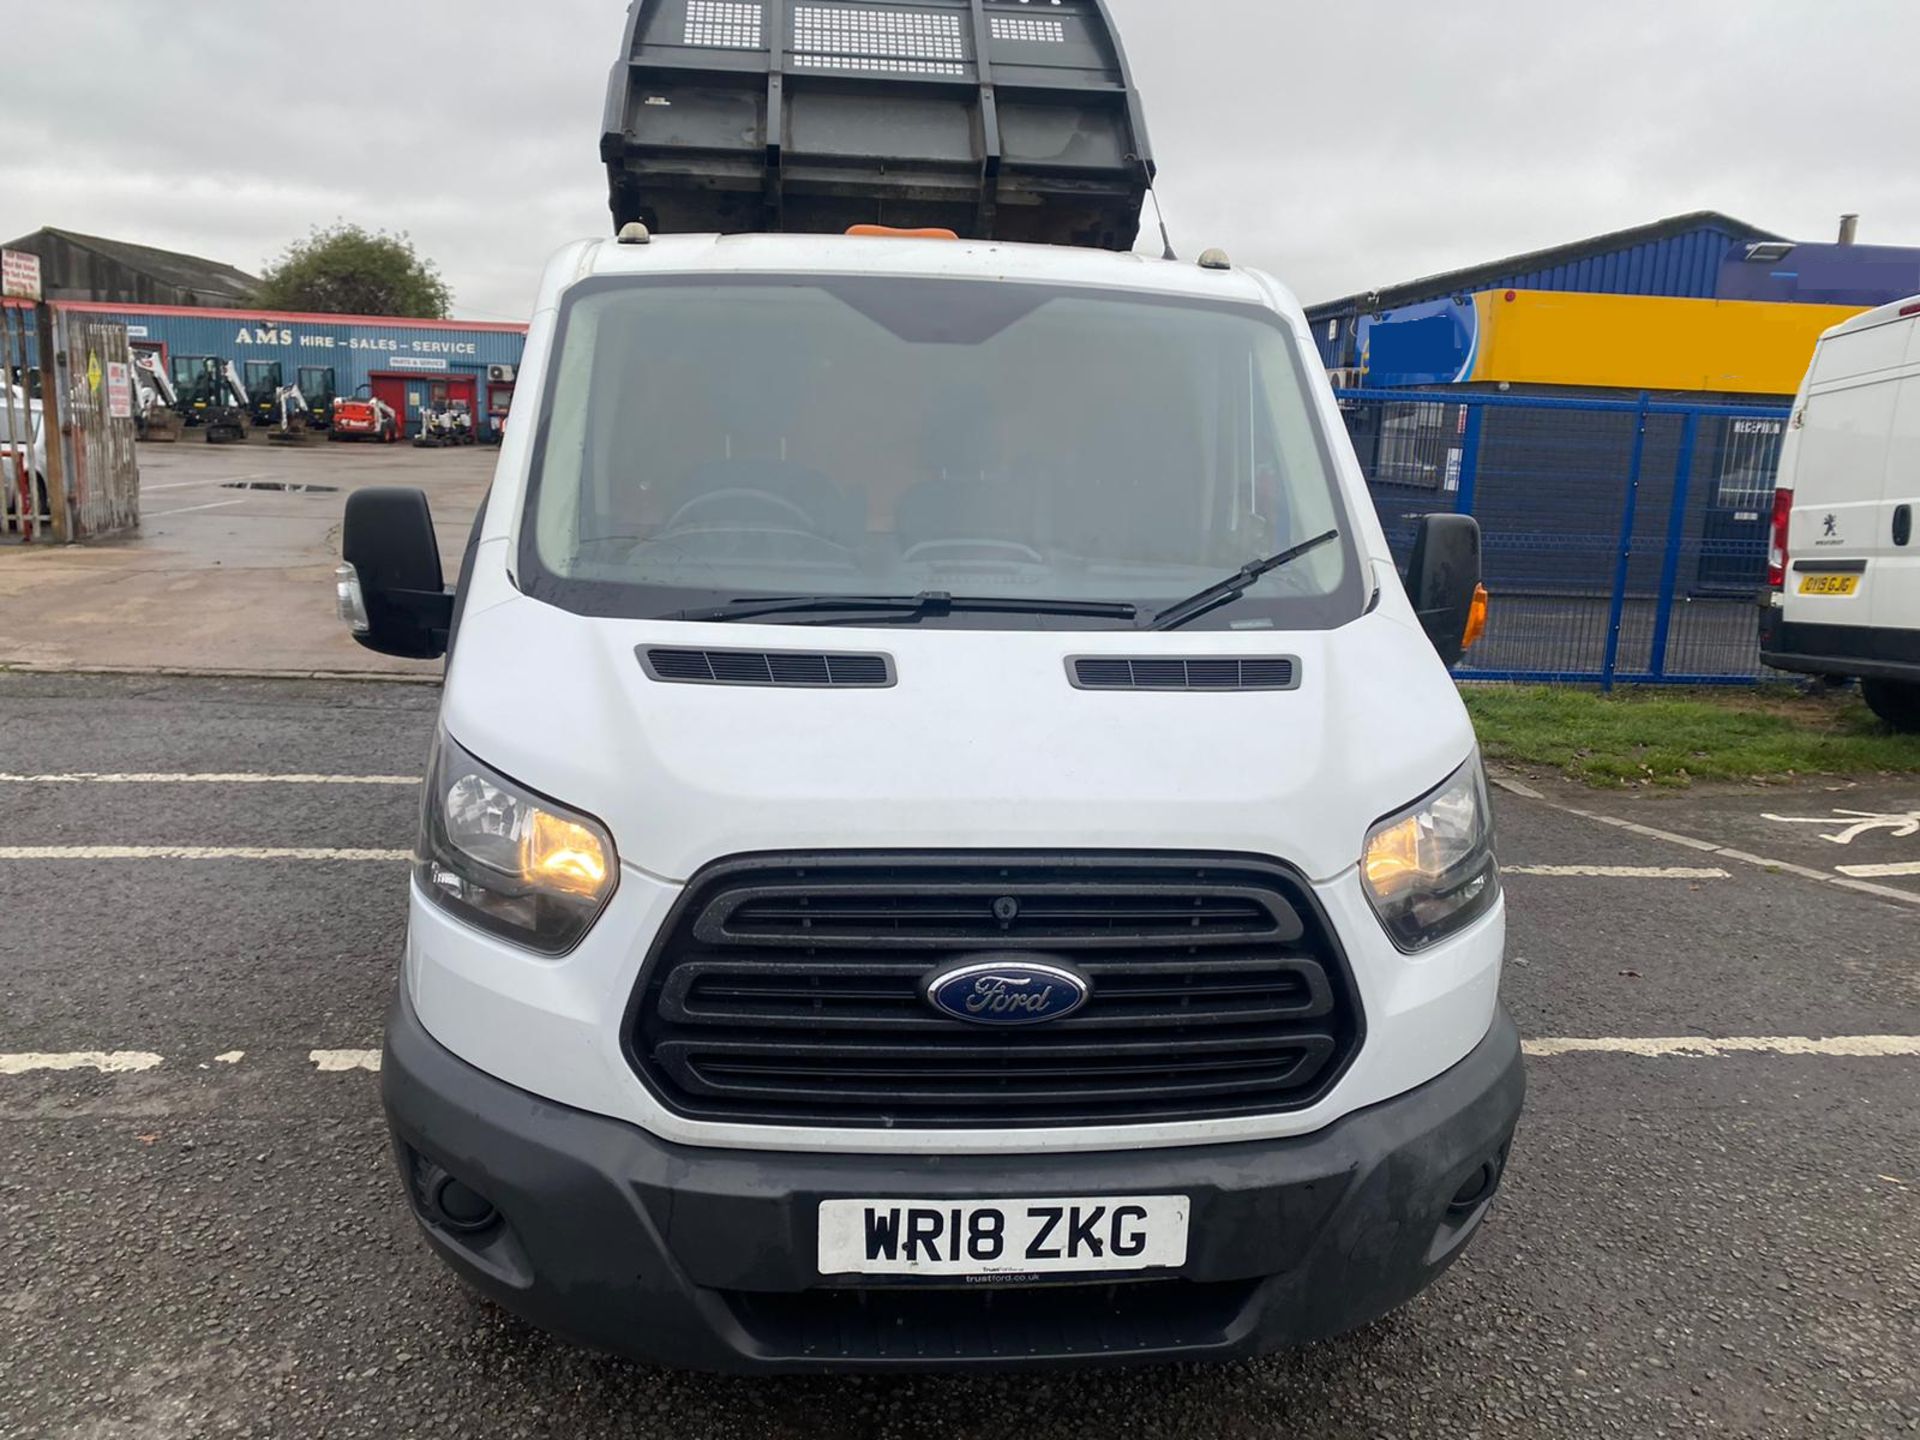 2018 18 FORD TRANSIT CREW CAB TIPPER - 96K MILES - EURO 6 - TWIN REAR WHEEL - Image 2 of 11